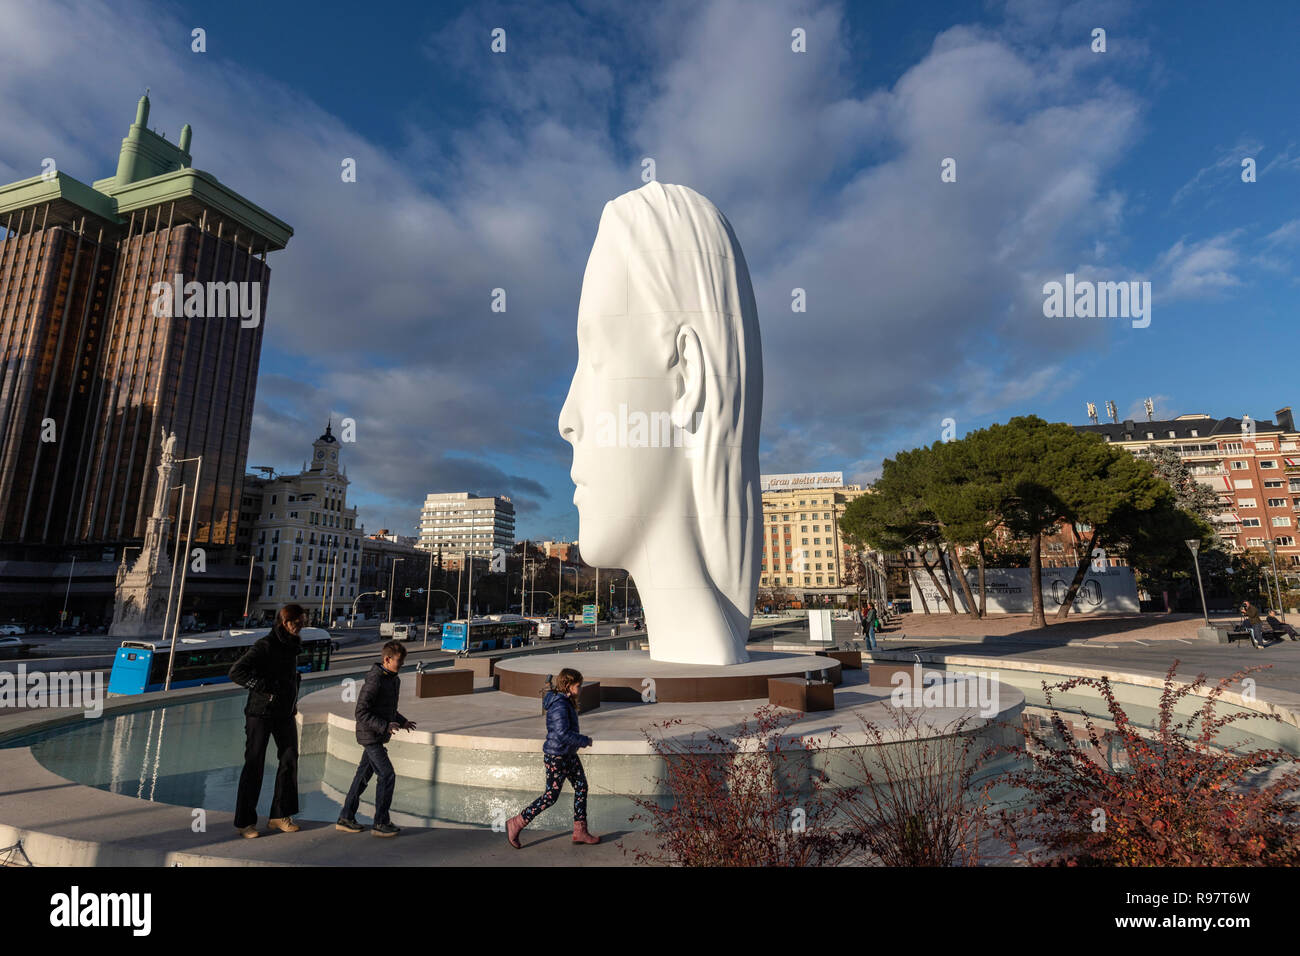 Family walking around the Julia, white marble sculpture by Jaume Plensa in Plaza Colon, Madrid, Spain Stock Photo